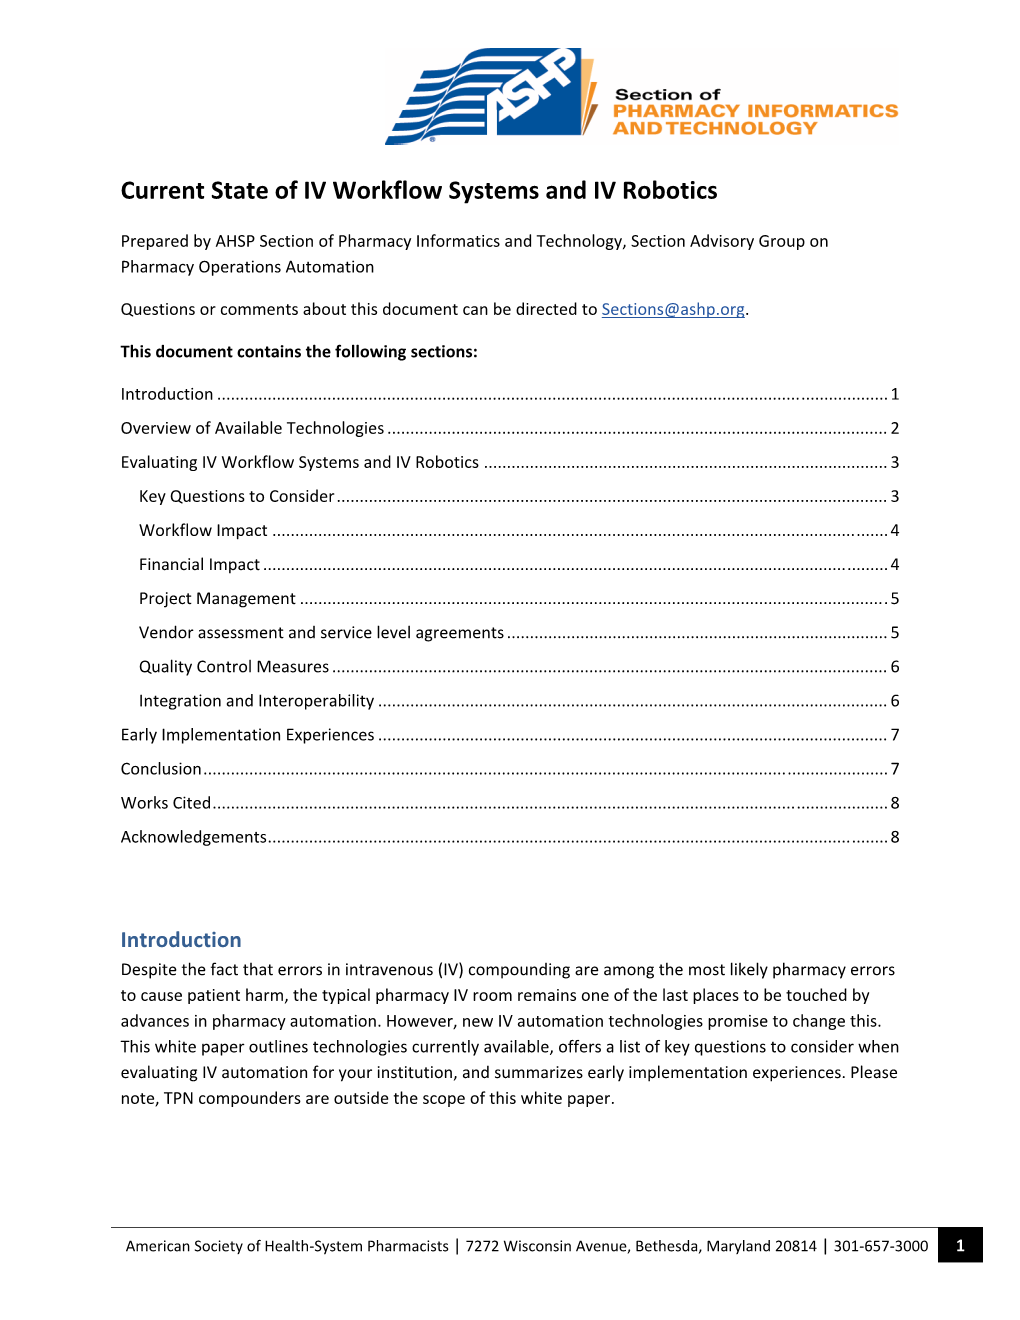 Current State of IV Workflow Systems and IV Robotics